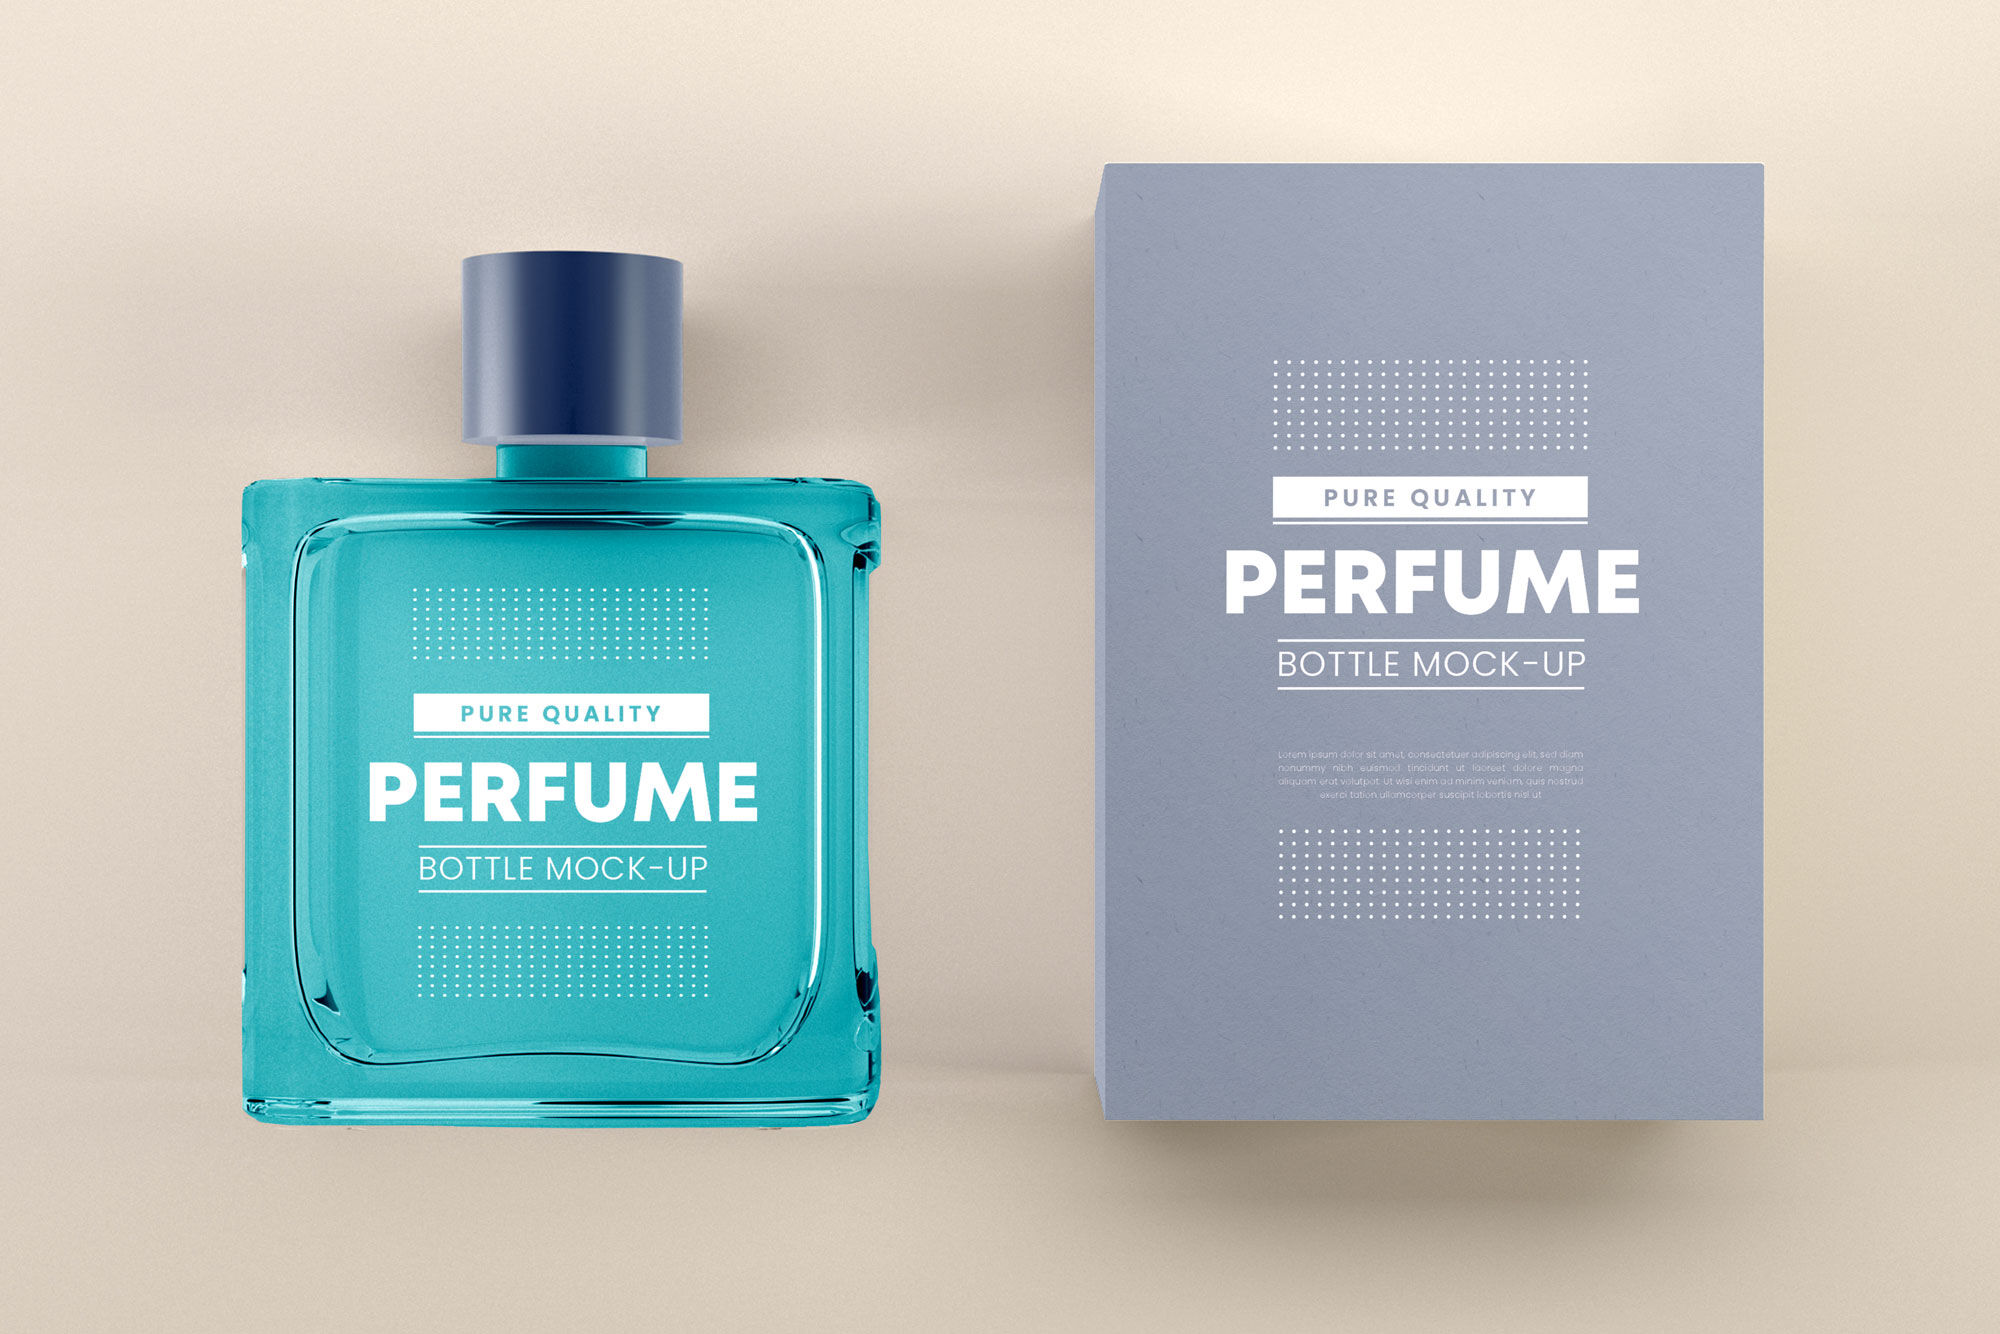 Perca Silenciosamente celebrar Square Perfume Bottle and its Packaging Box in Top View Mockup (FREE) -  Resource Boy